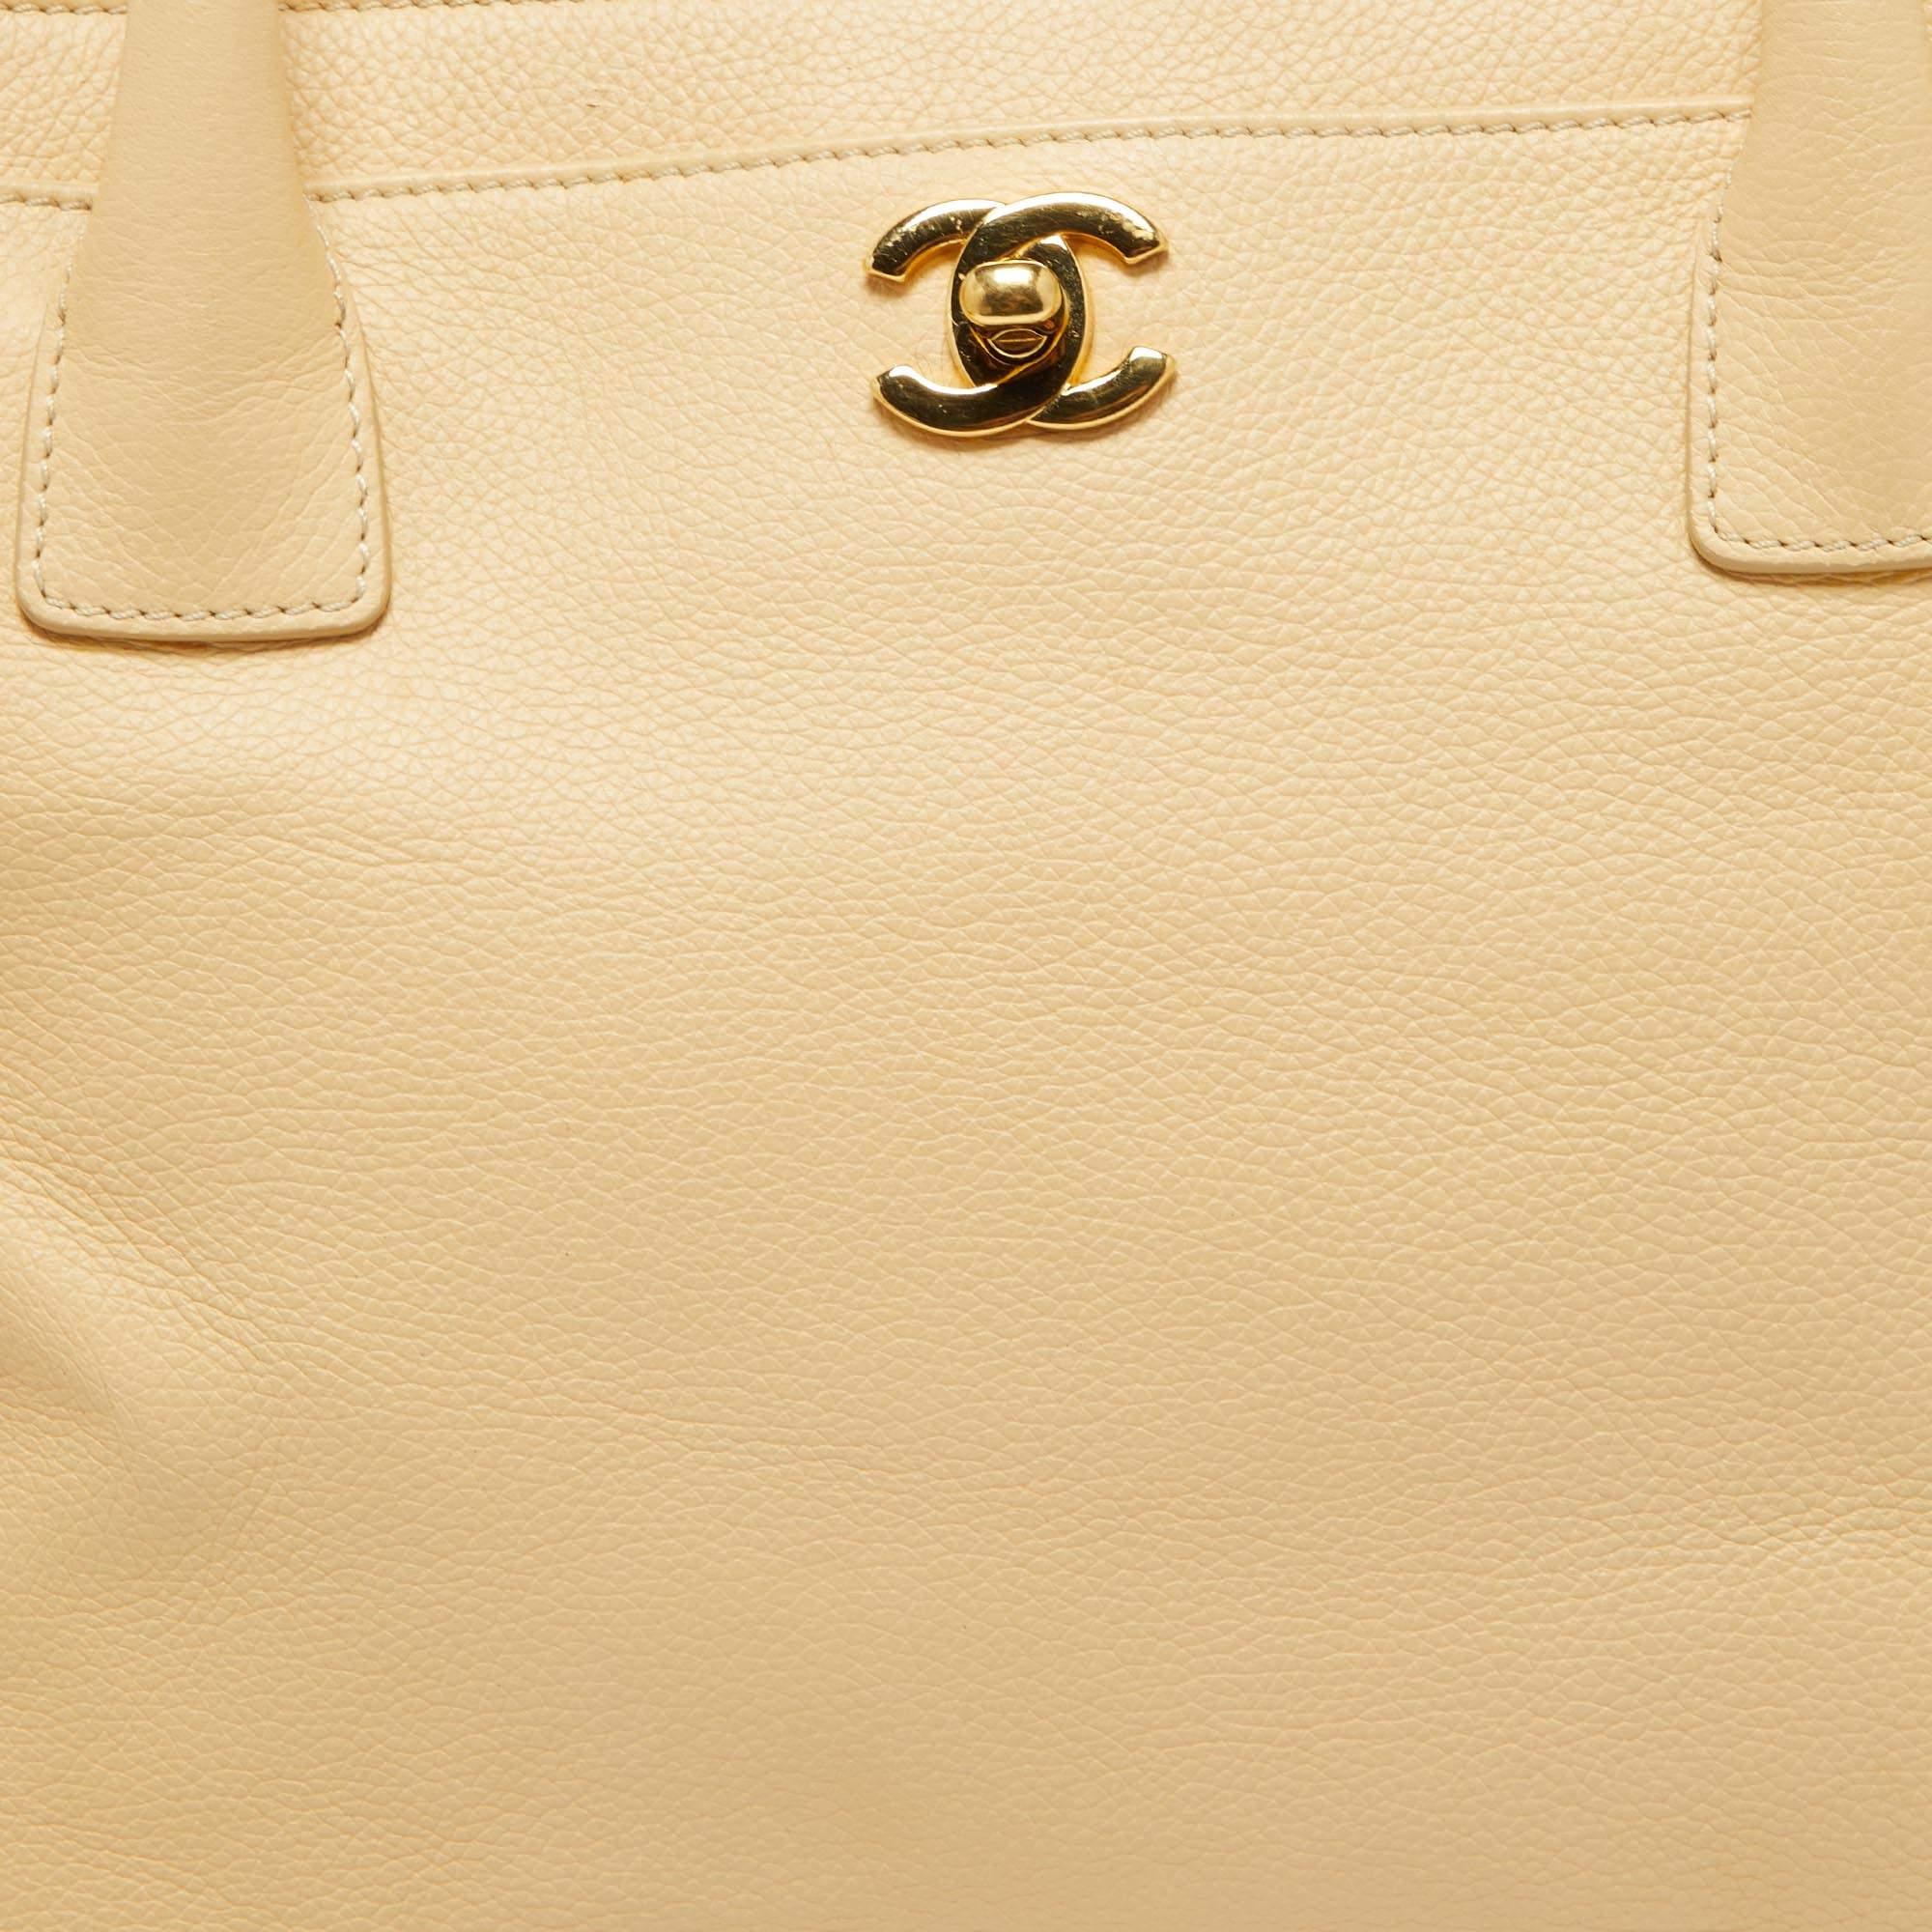 Chanel Beige Leather Cerf Shopper Tote 15